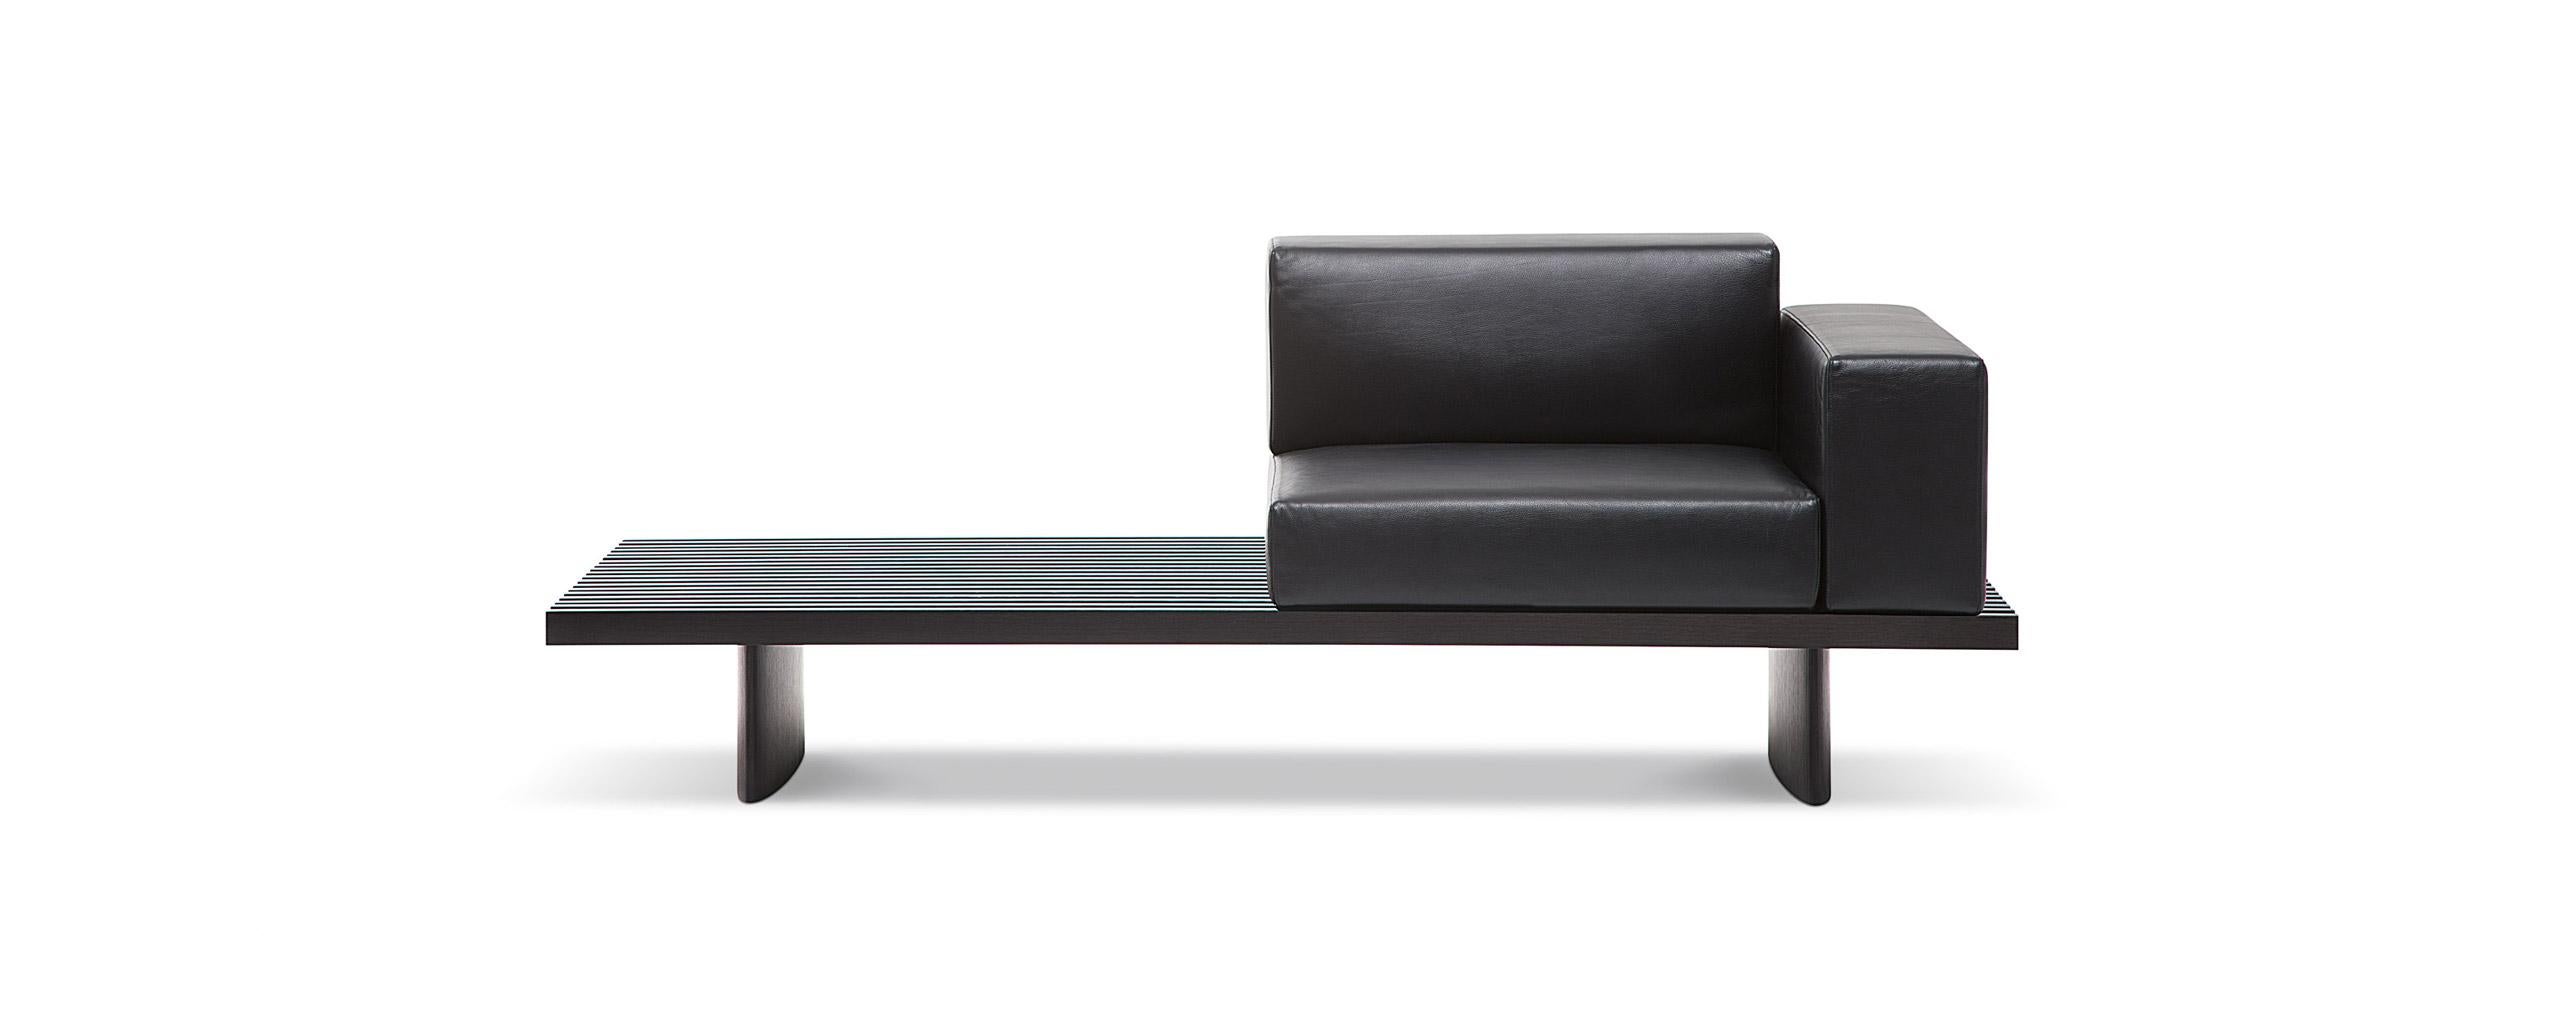 Charlotte Perriand Refolo Modular Sofa, Wood and Black Leather by Cassina 1